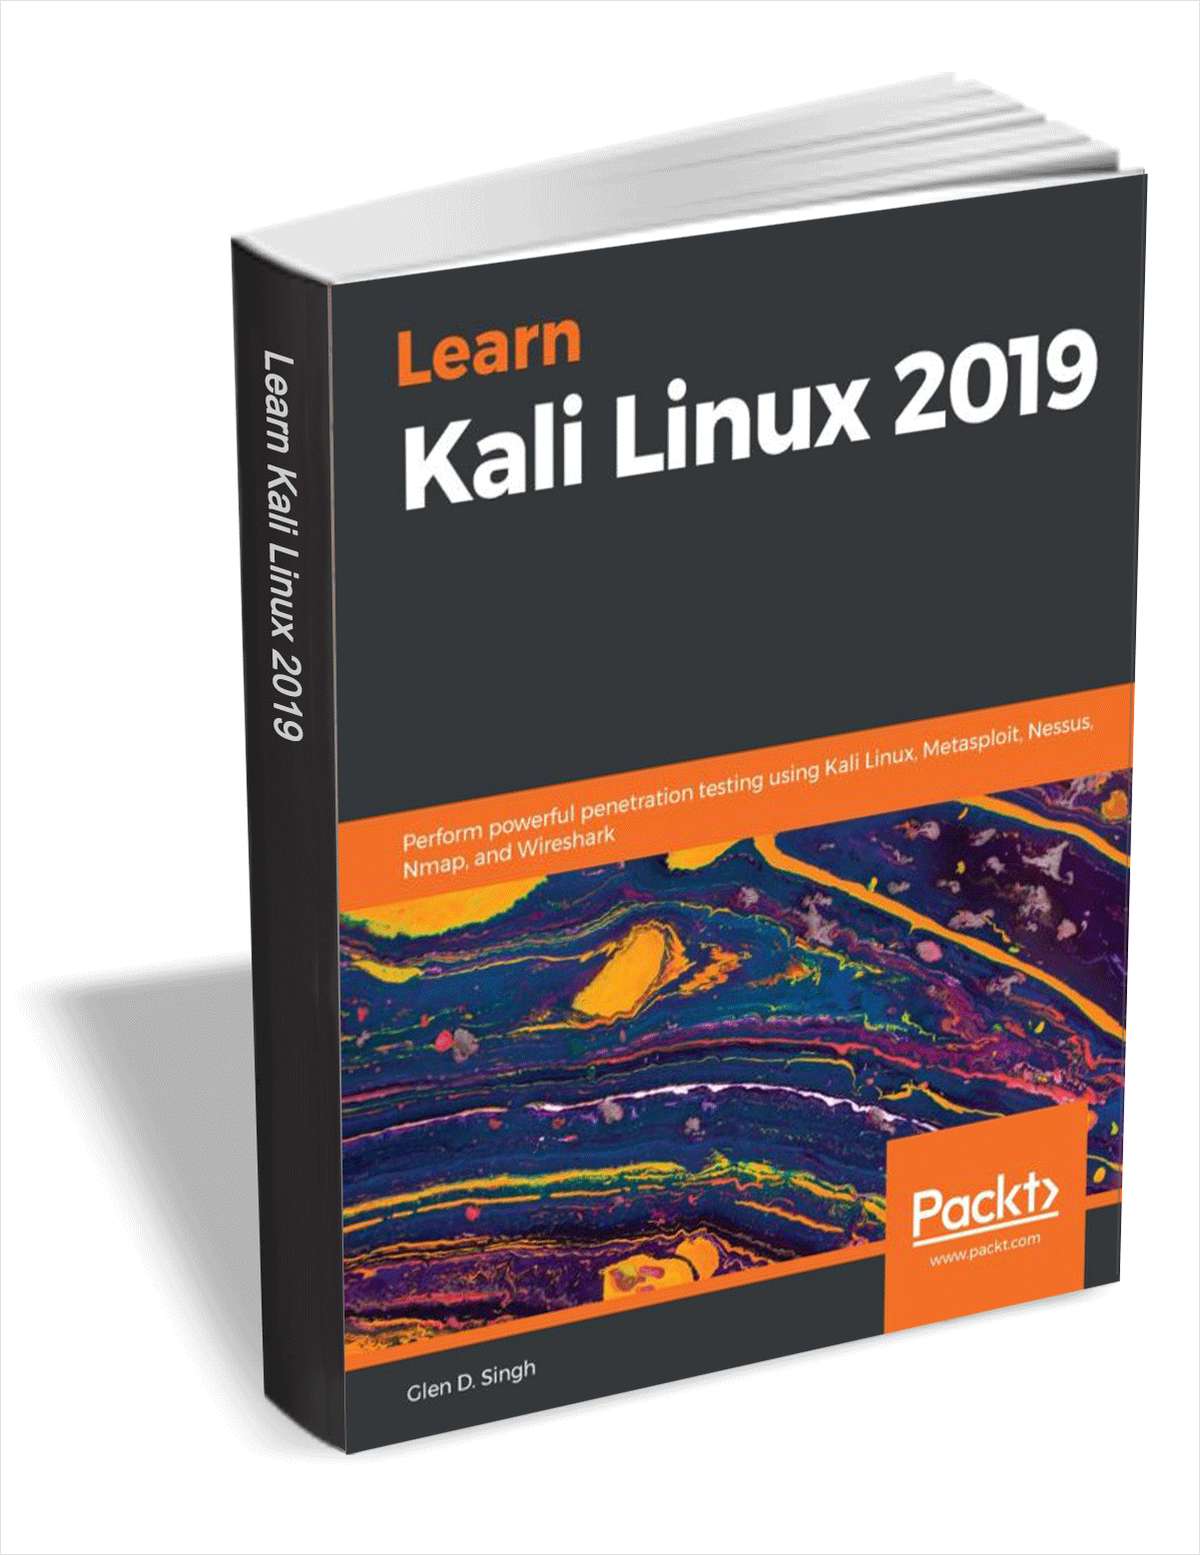 Learn kali linux 2019 pdf free download music clips free download